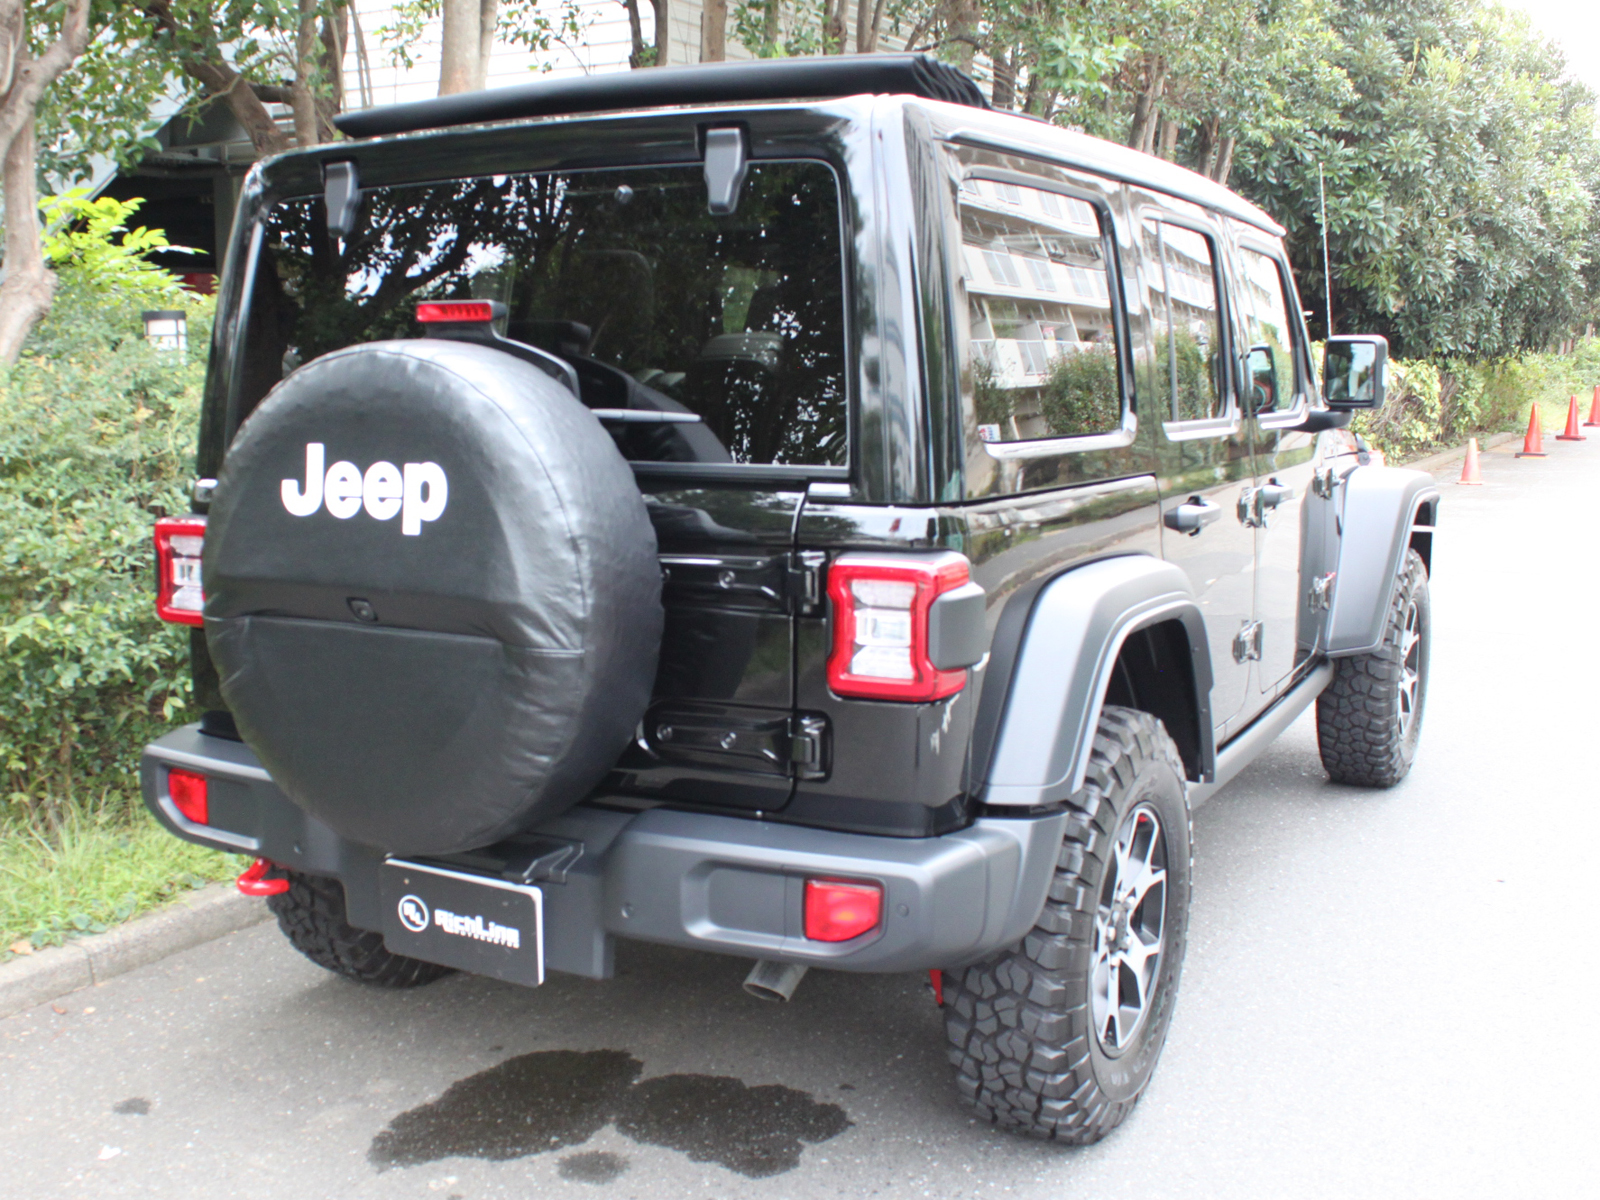 Wrangler Unlimited Rubicon Sky One-Touch Power Topリッチライン